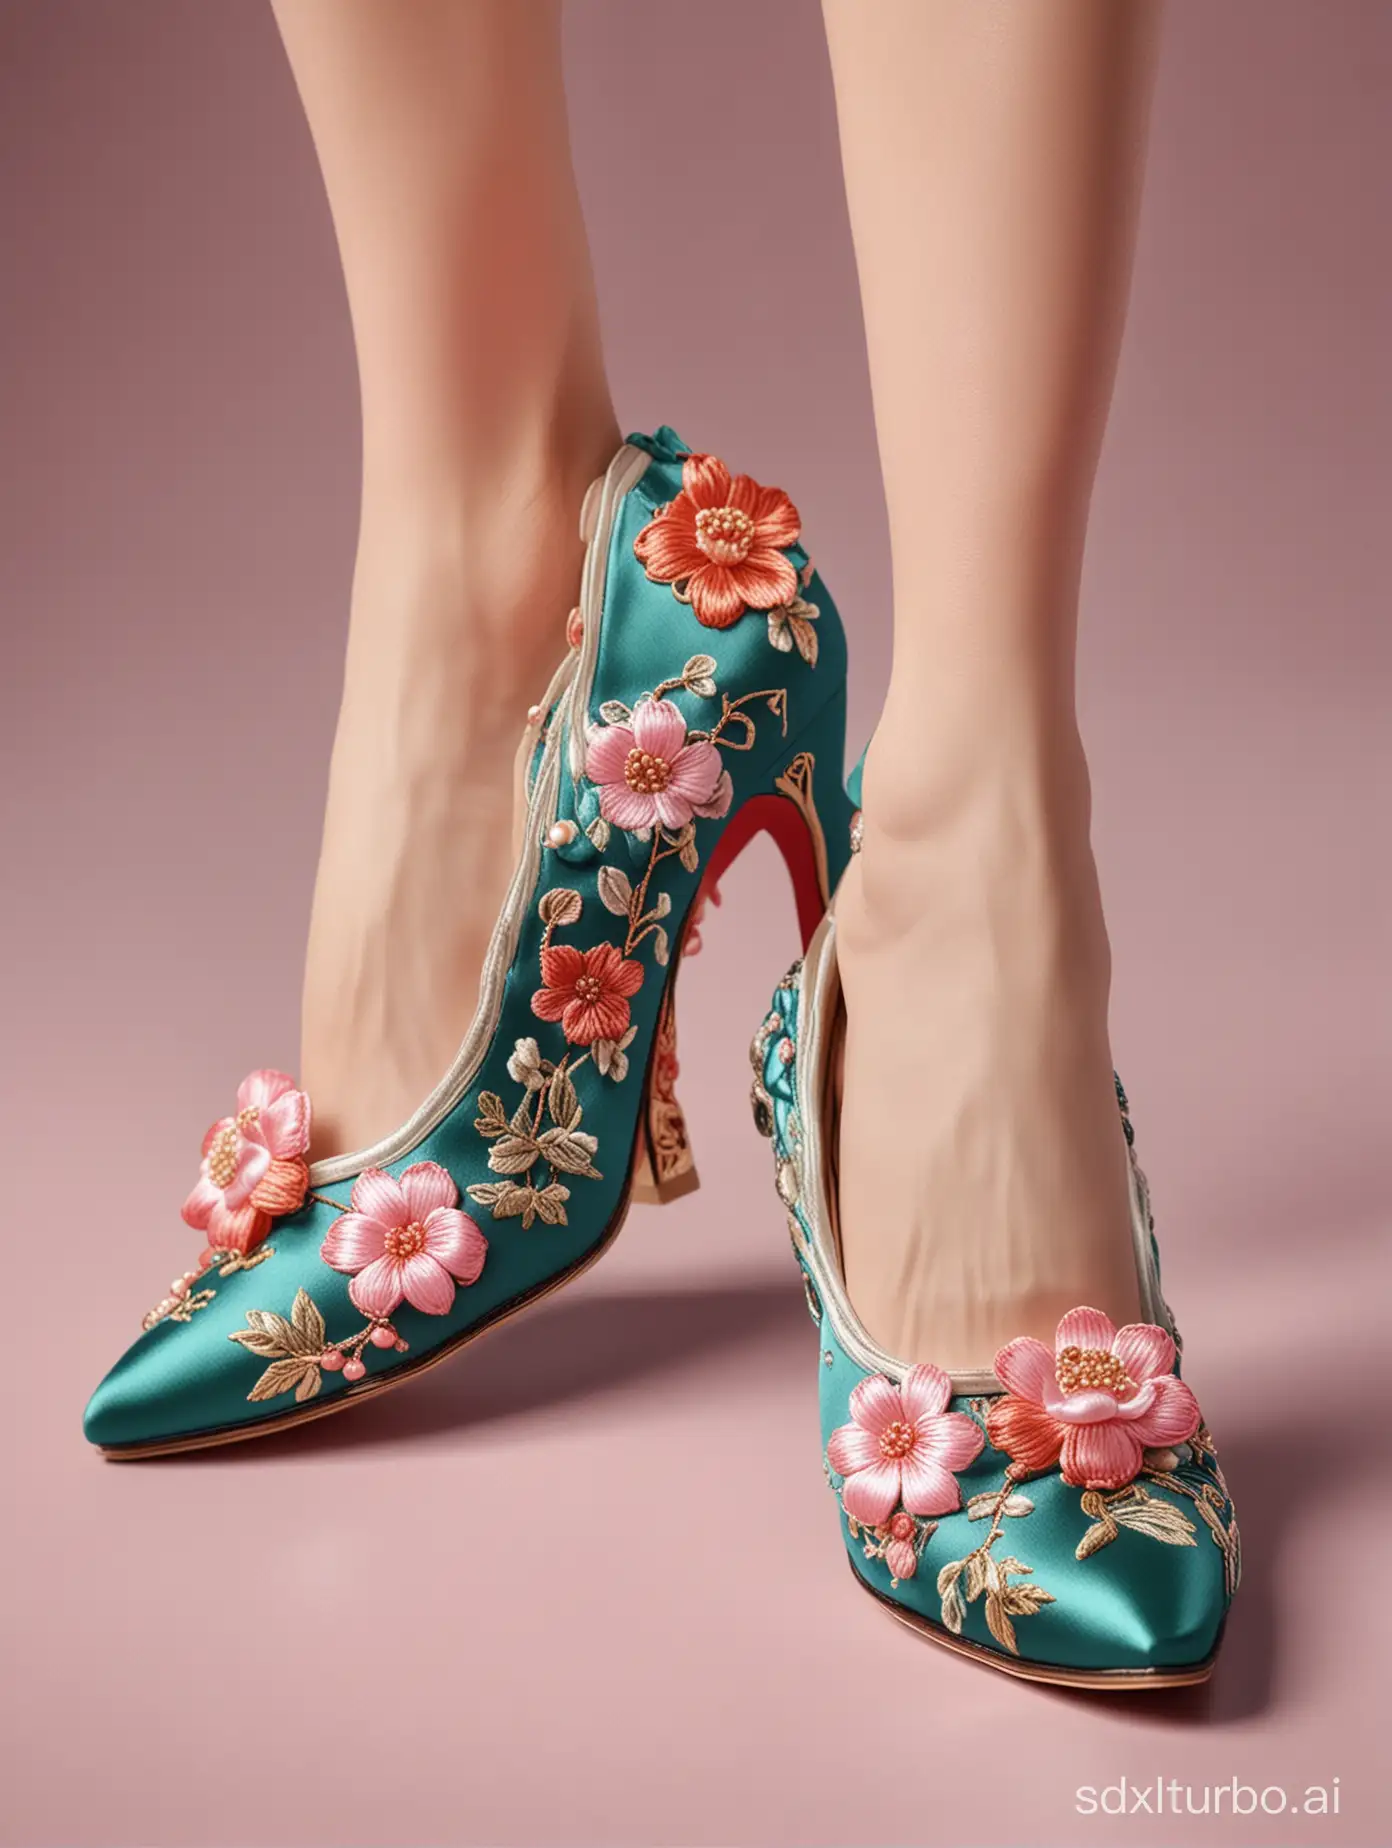 Exquisite-Embroidered-HighHeeled-Shoes-with-Chinese-Knots-and-Jade-Ornaments-on-Luxurious-Silk-Background